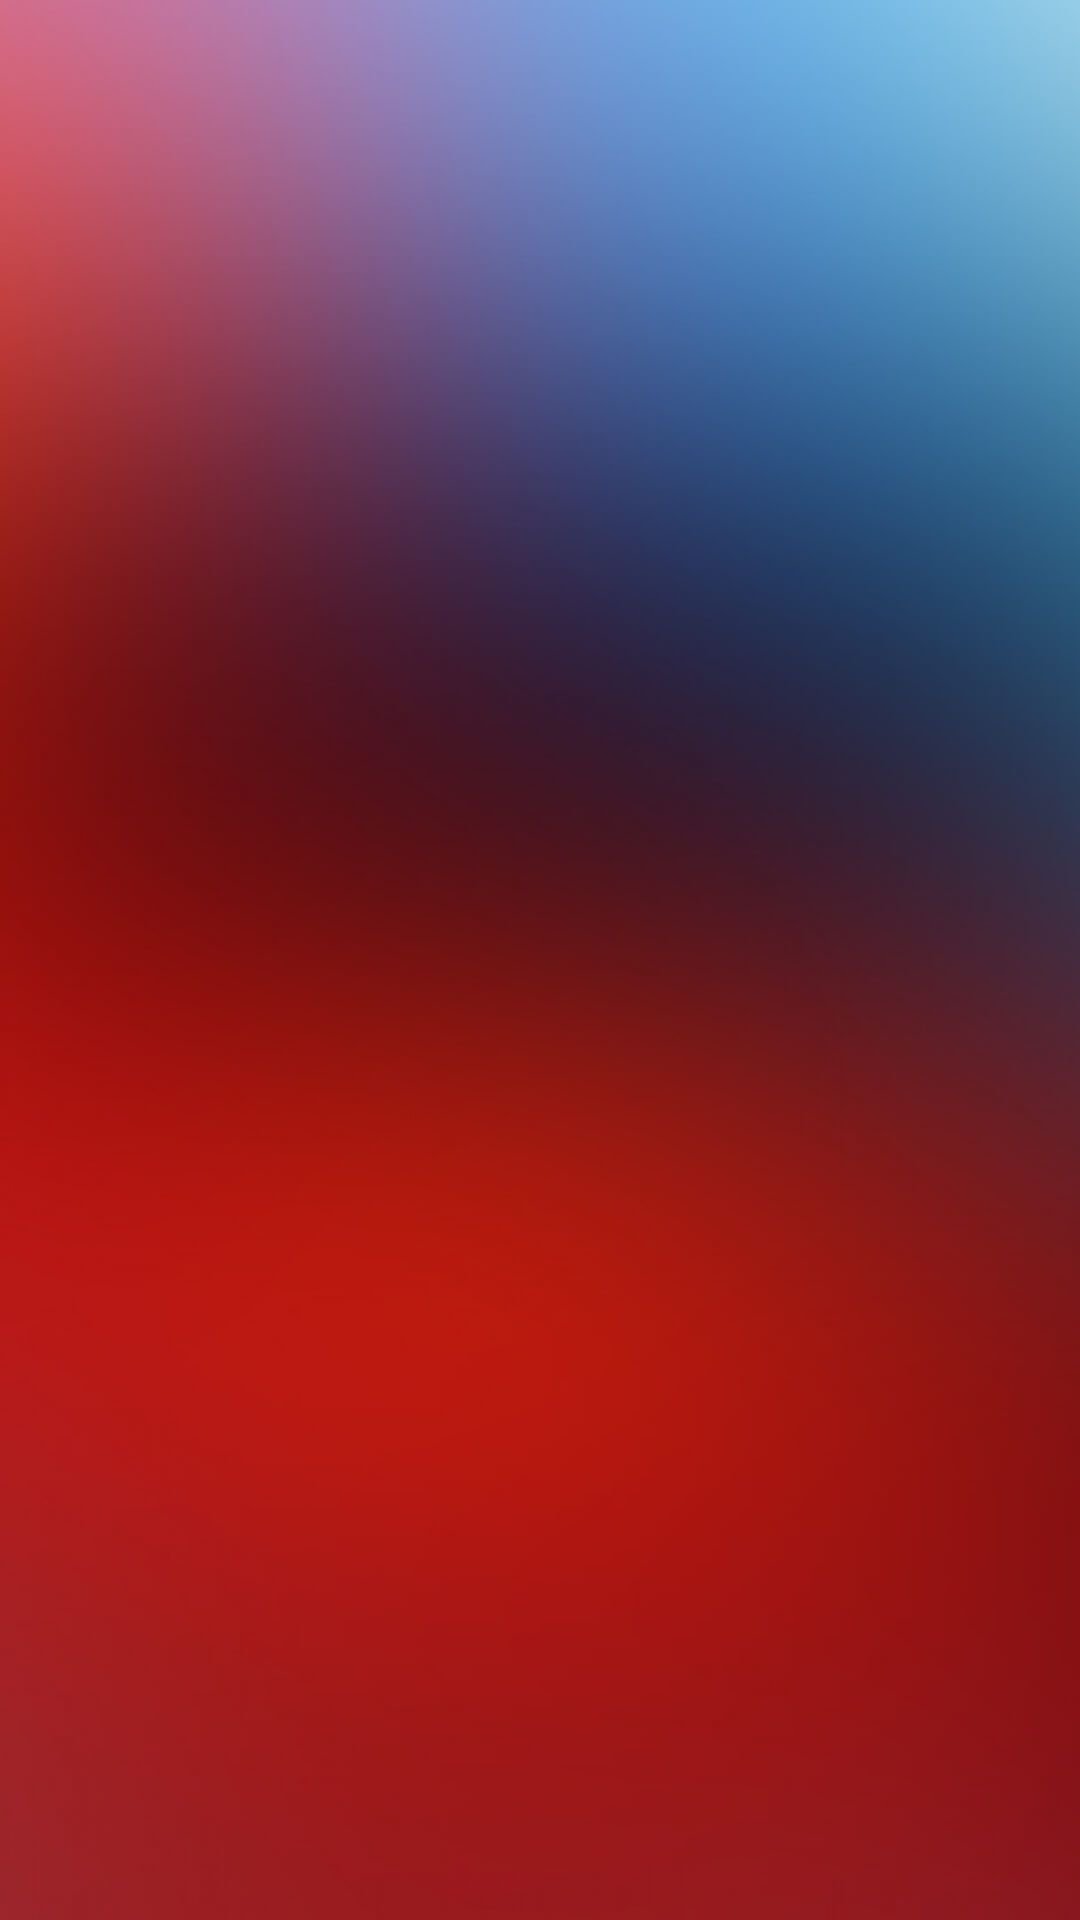 Red and Blue iPhone Wallpaper Free Red and Blue iPhone Background